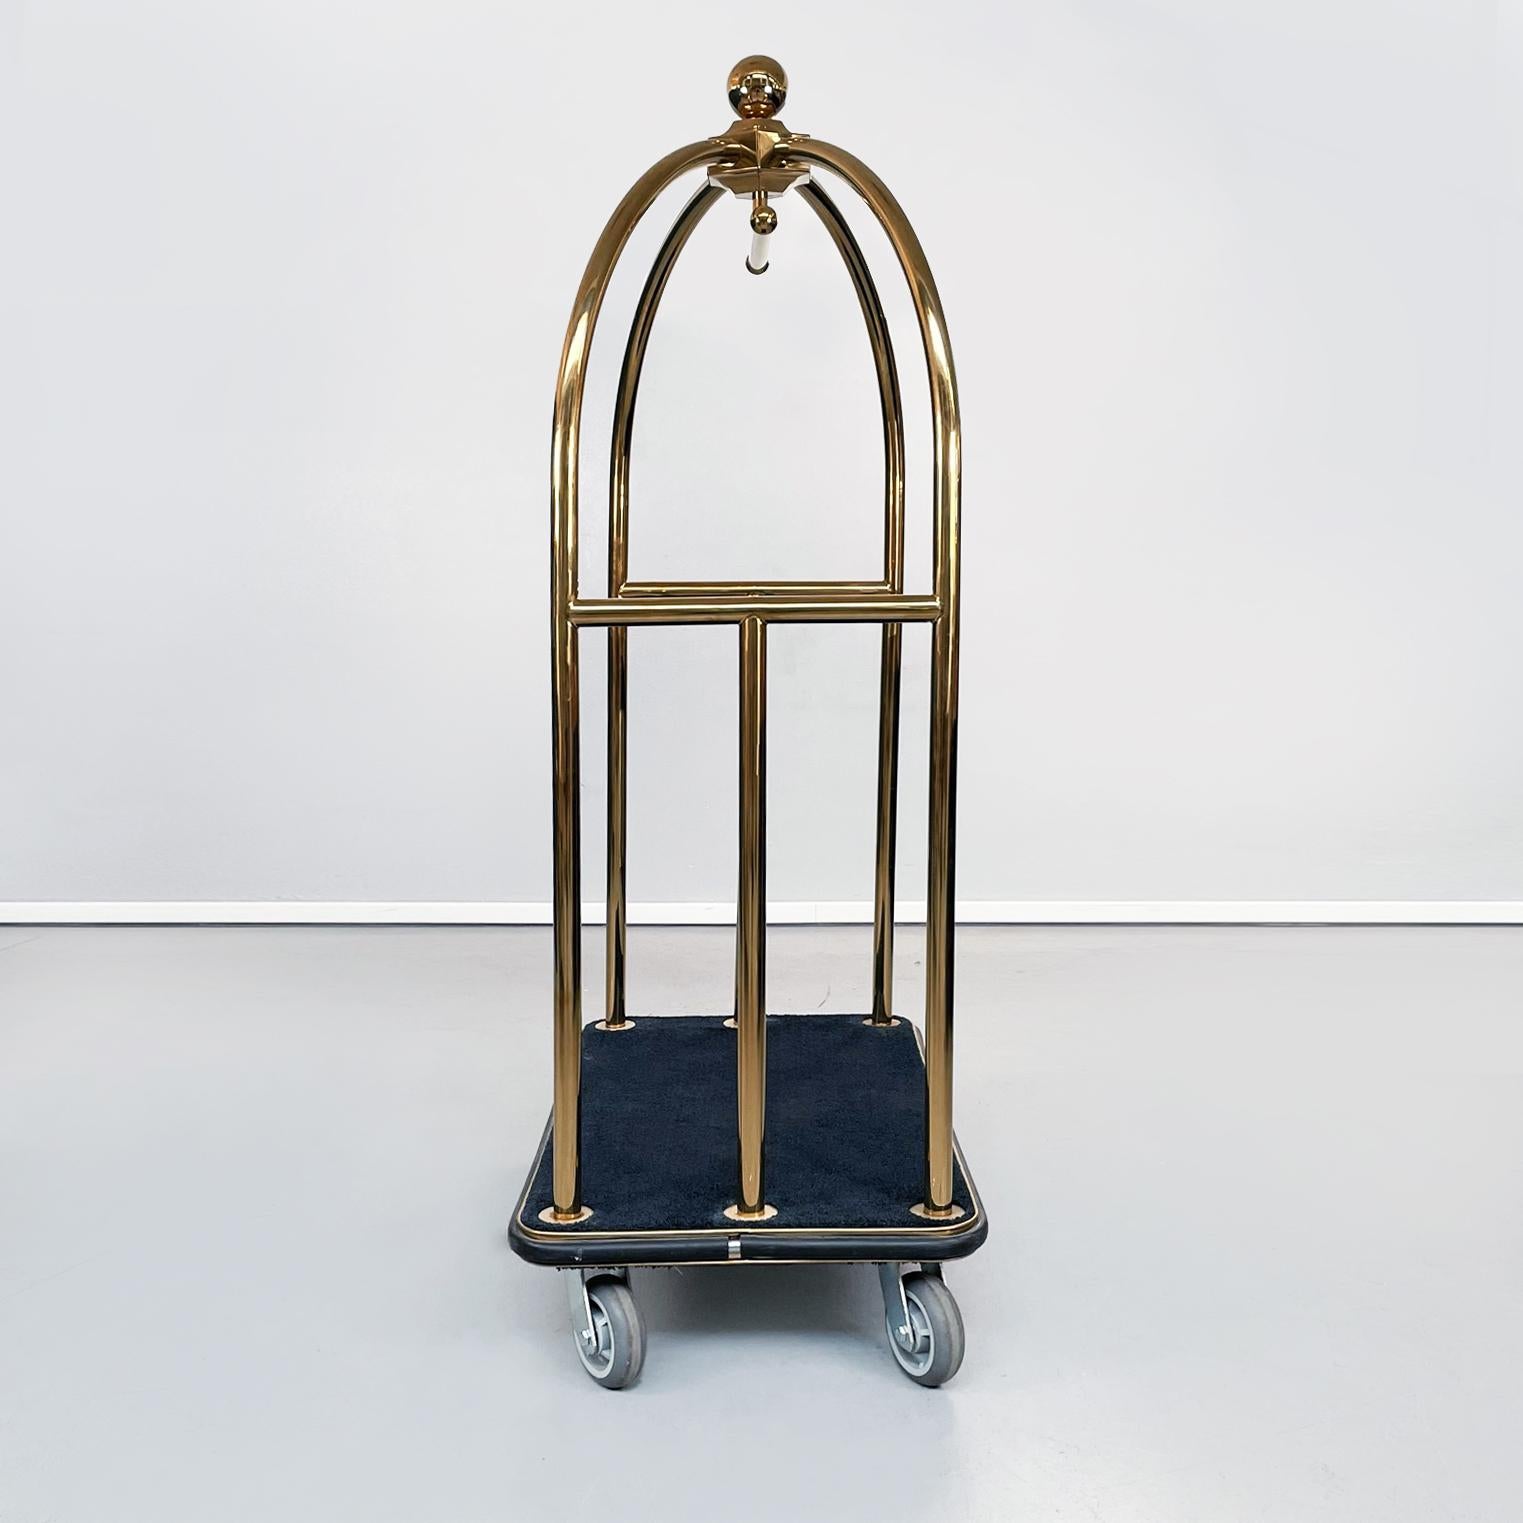 Italian modern Classique luggage cart in metal and black fabric, 1990s
Luggage cart model Classique, typical of hotels, with central top in black fabric. The structure is in tubular chromed metal. In the upper central part there are a decorative